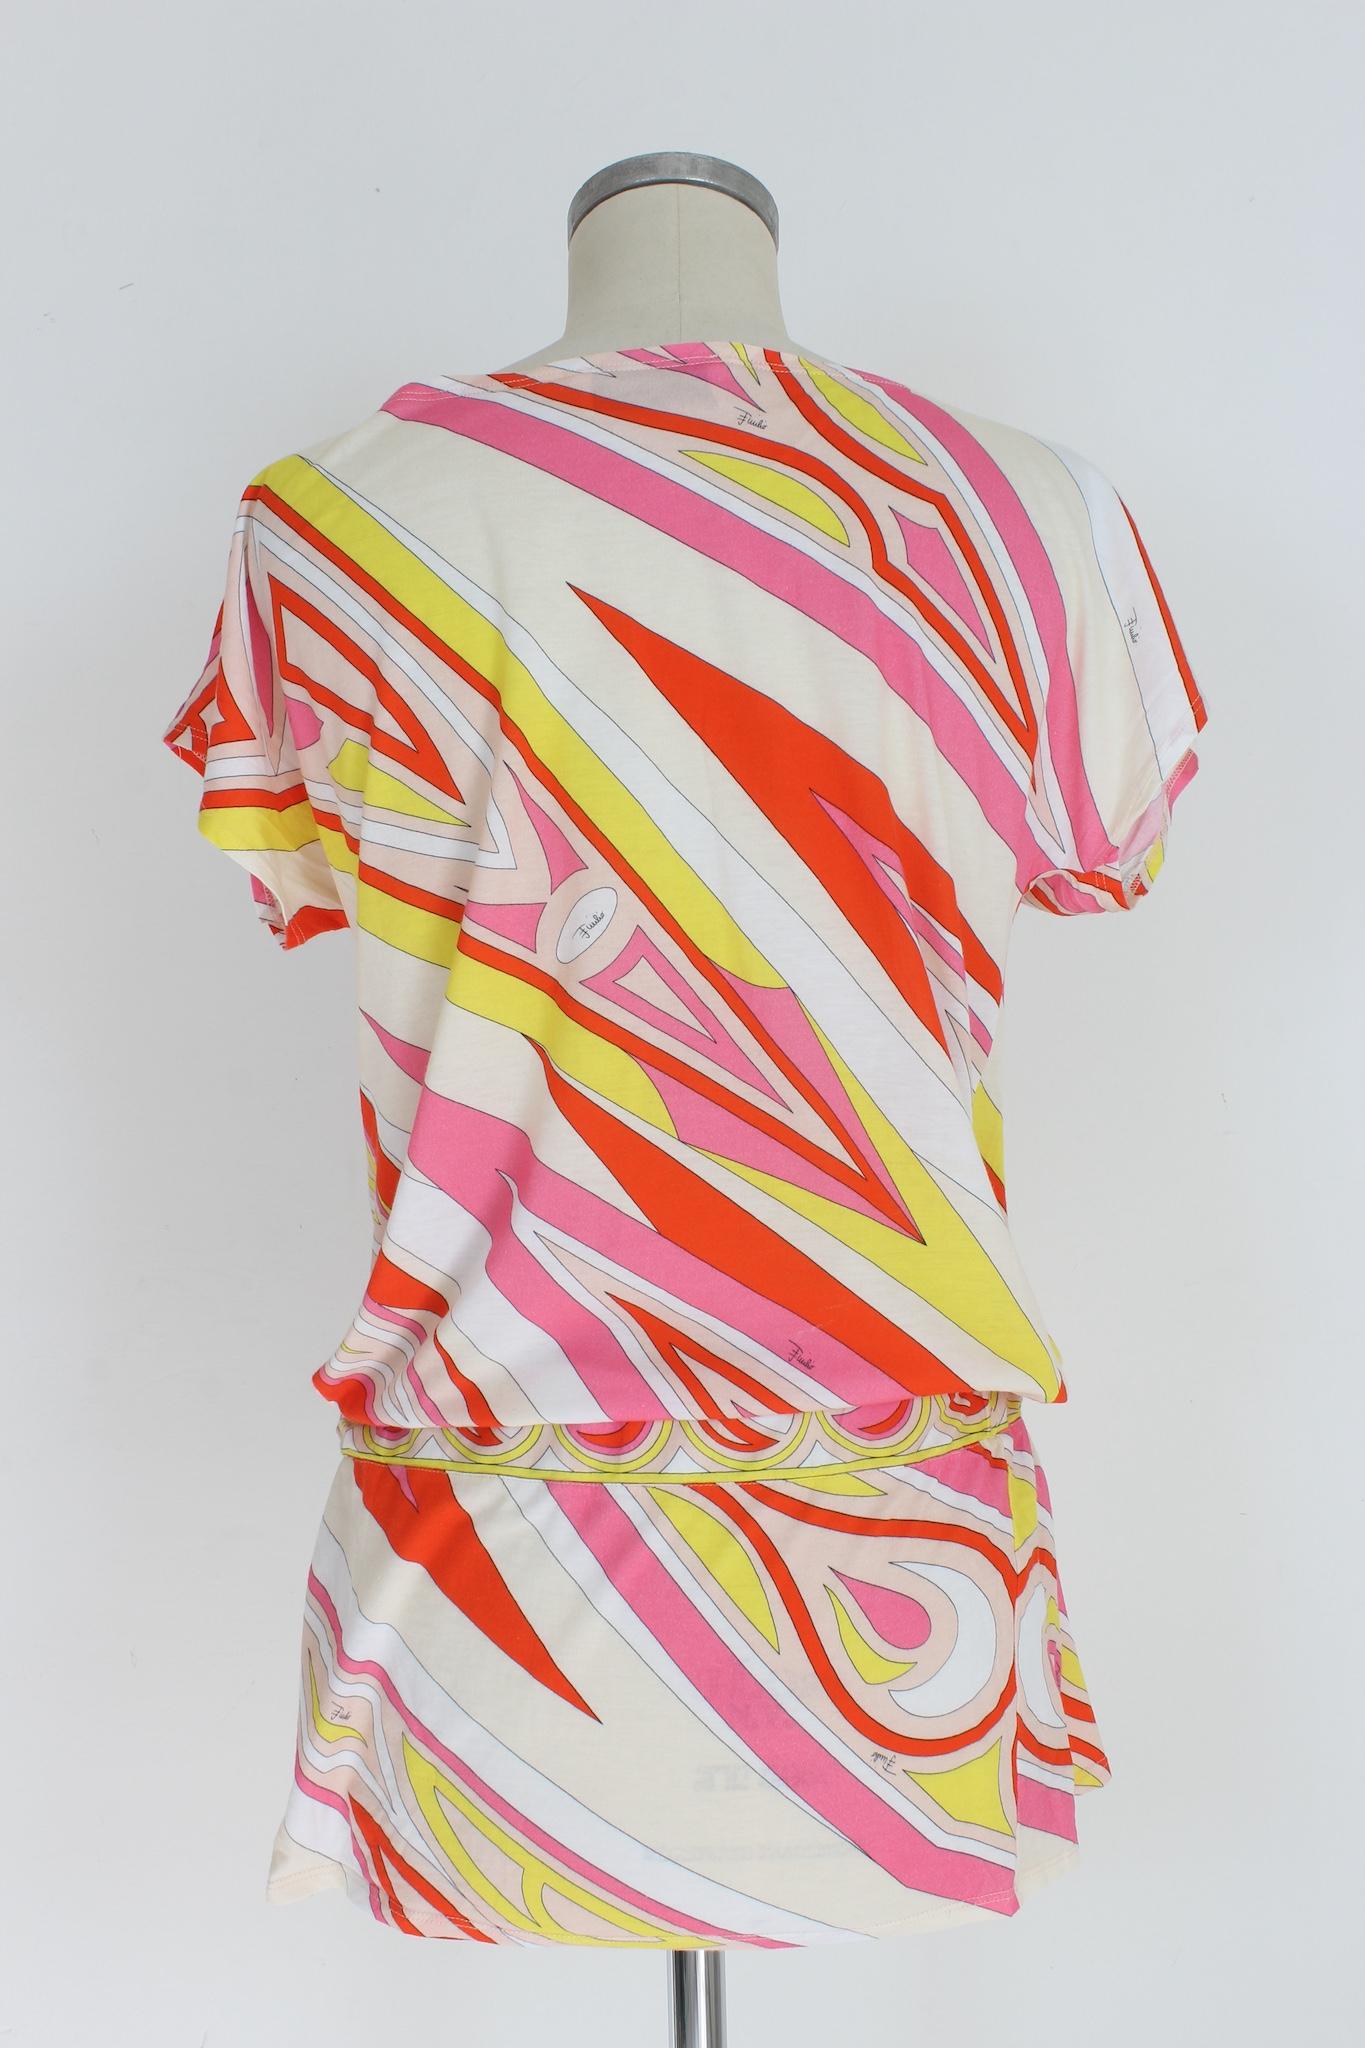 Emilio Pucci vintage 90s casual long t shirt. White, pink and orange color with typical pattern of the fashion house. Elastic waist, 100% cotton fabric. Made in Italy.

Size: M

Shoulder: 44 cm
Bust/Chest: 51cm
Sleeve: 12 cm
Length: 72 cm
Vita: 42 cm